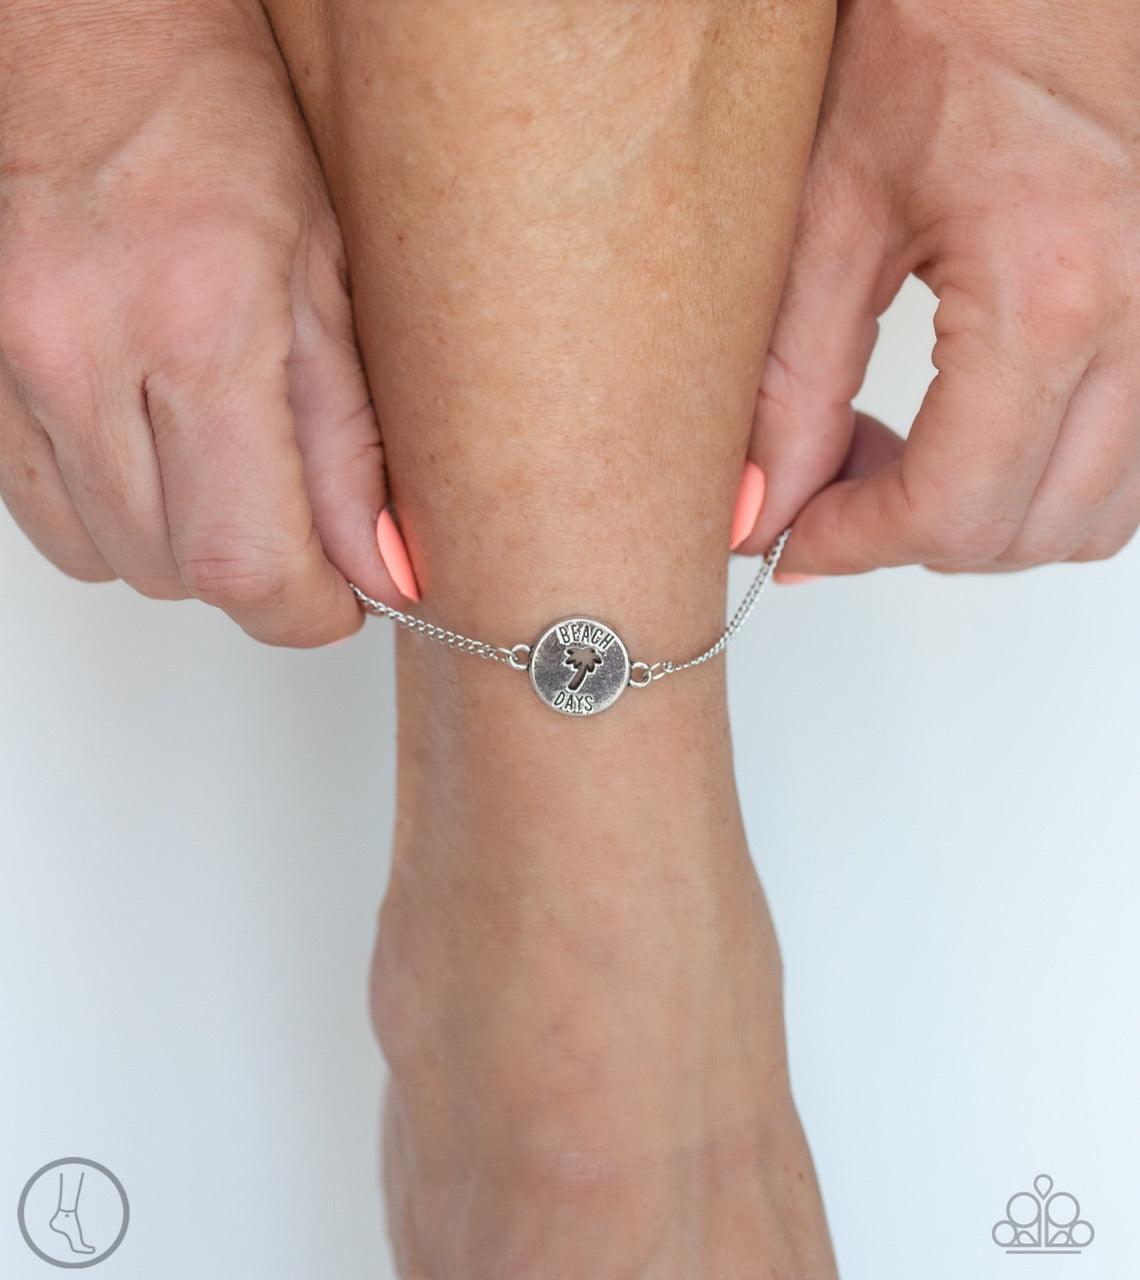 Paparazzi Accessories Summer Shade - Silver *Anklet Featuring an airy palm tree cutout and the words, "Beach Days", a shimmery silver charm attaches to a dainty silver chain around the ankle for a summery look. Features an adjustable clasp closure. Jewelr